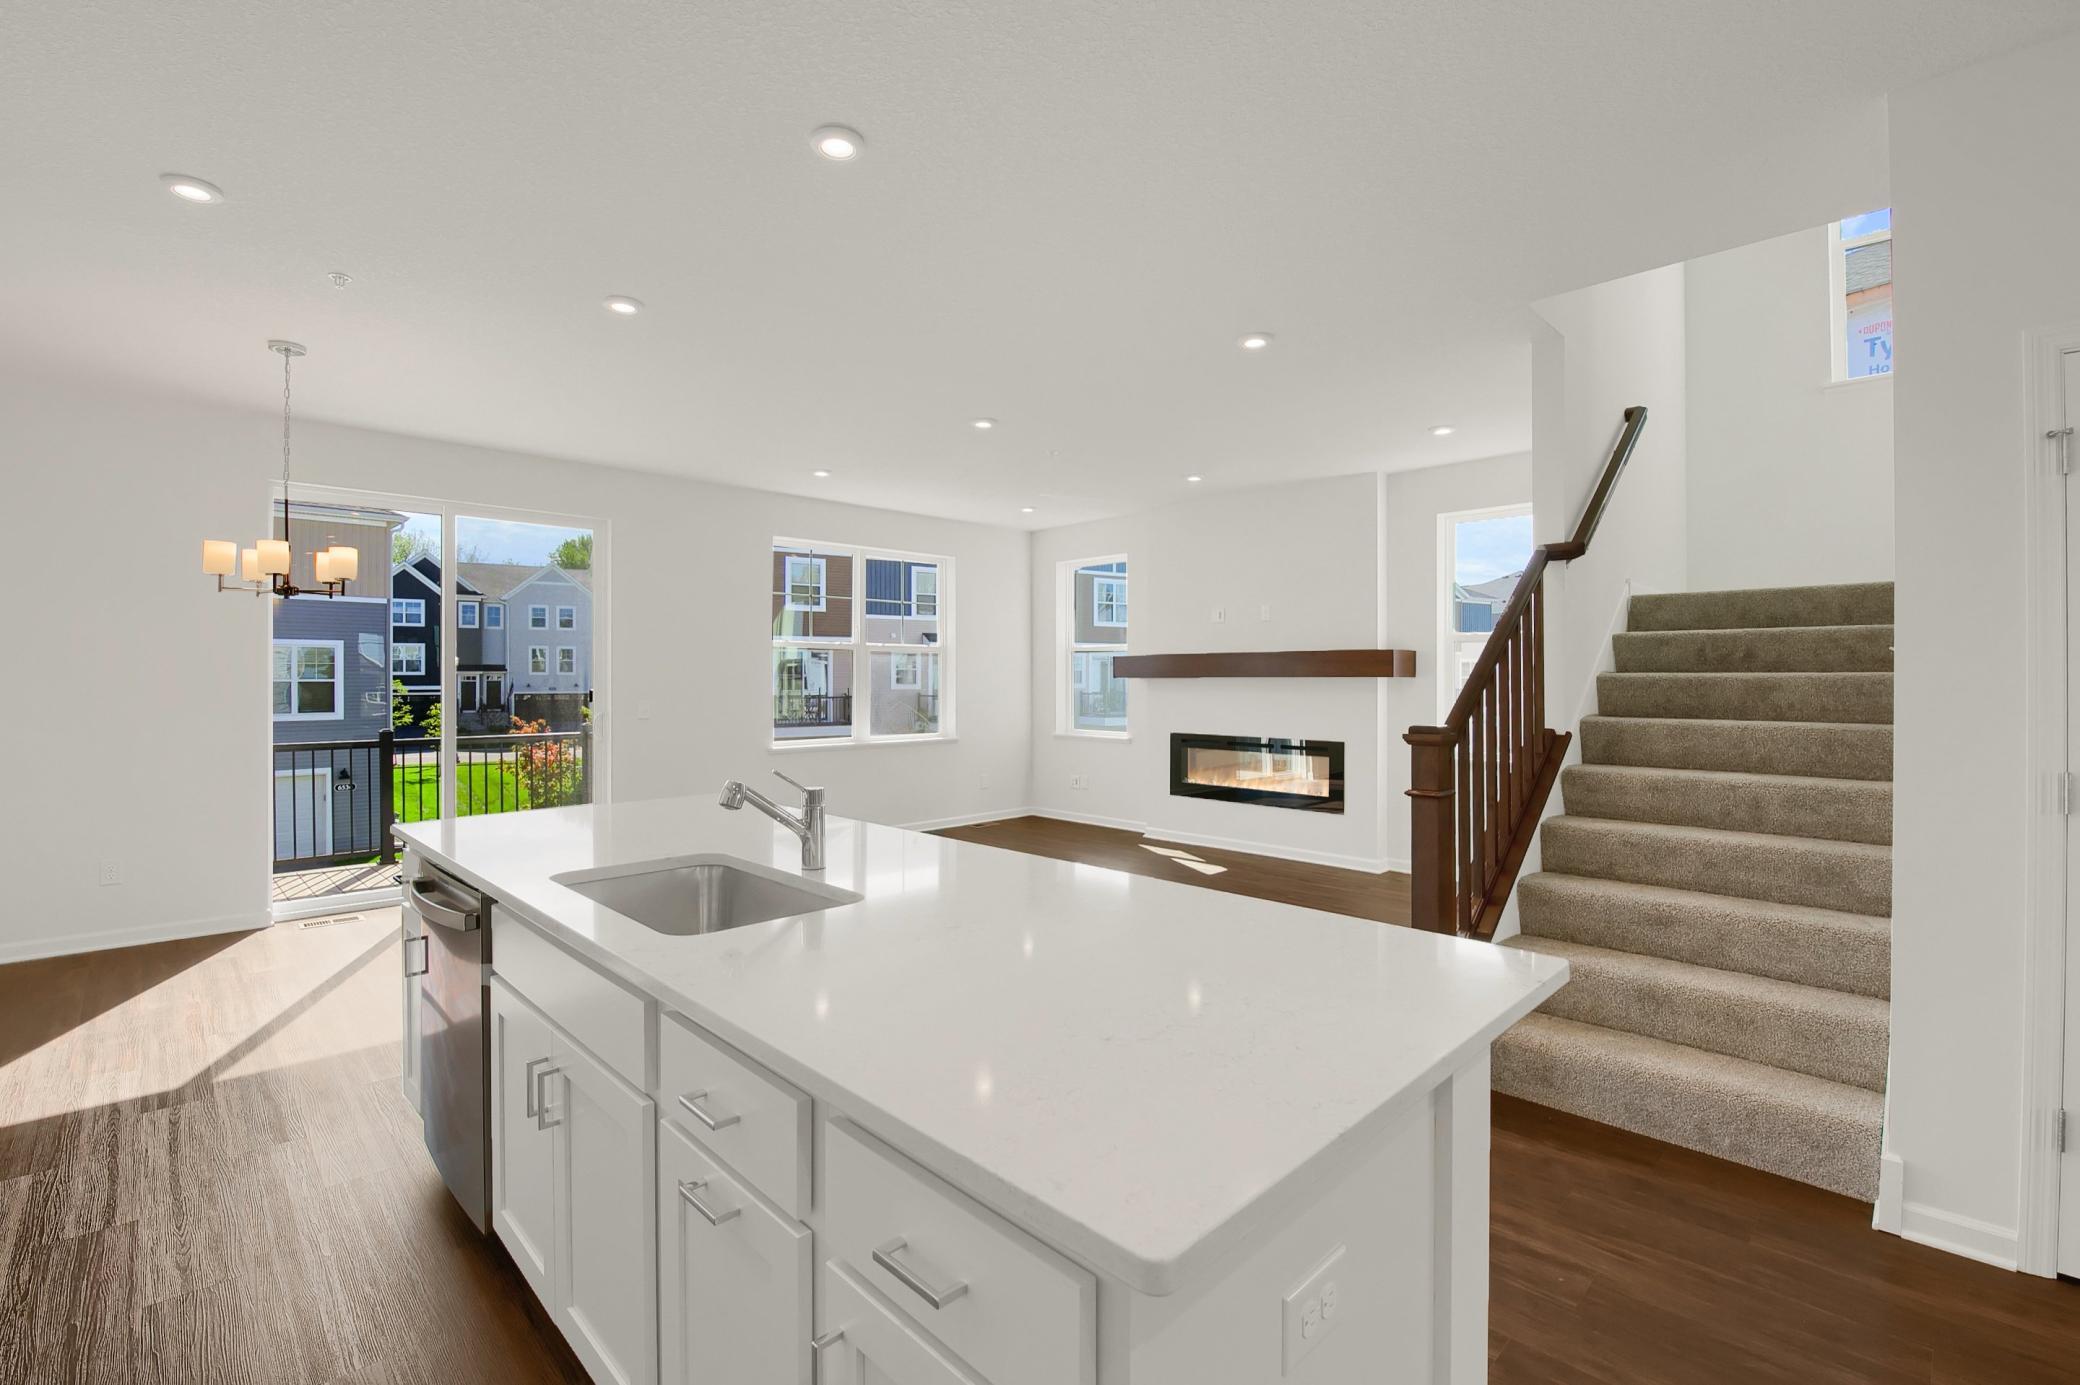 The kitchen overlooks the dining and family room of the open main floor plan design.